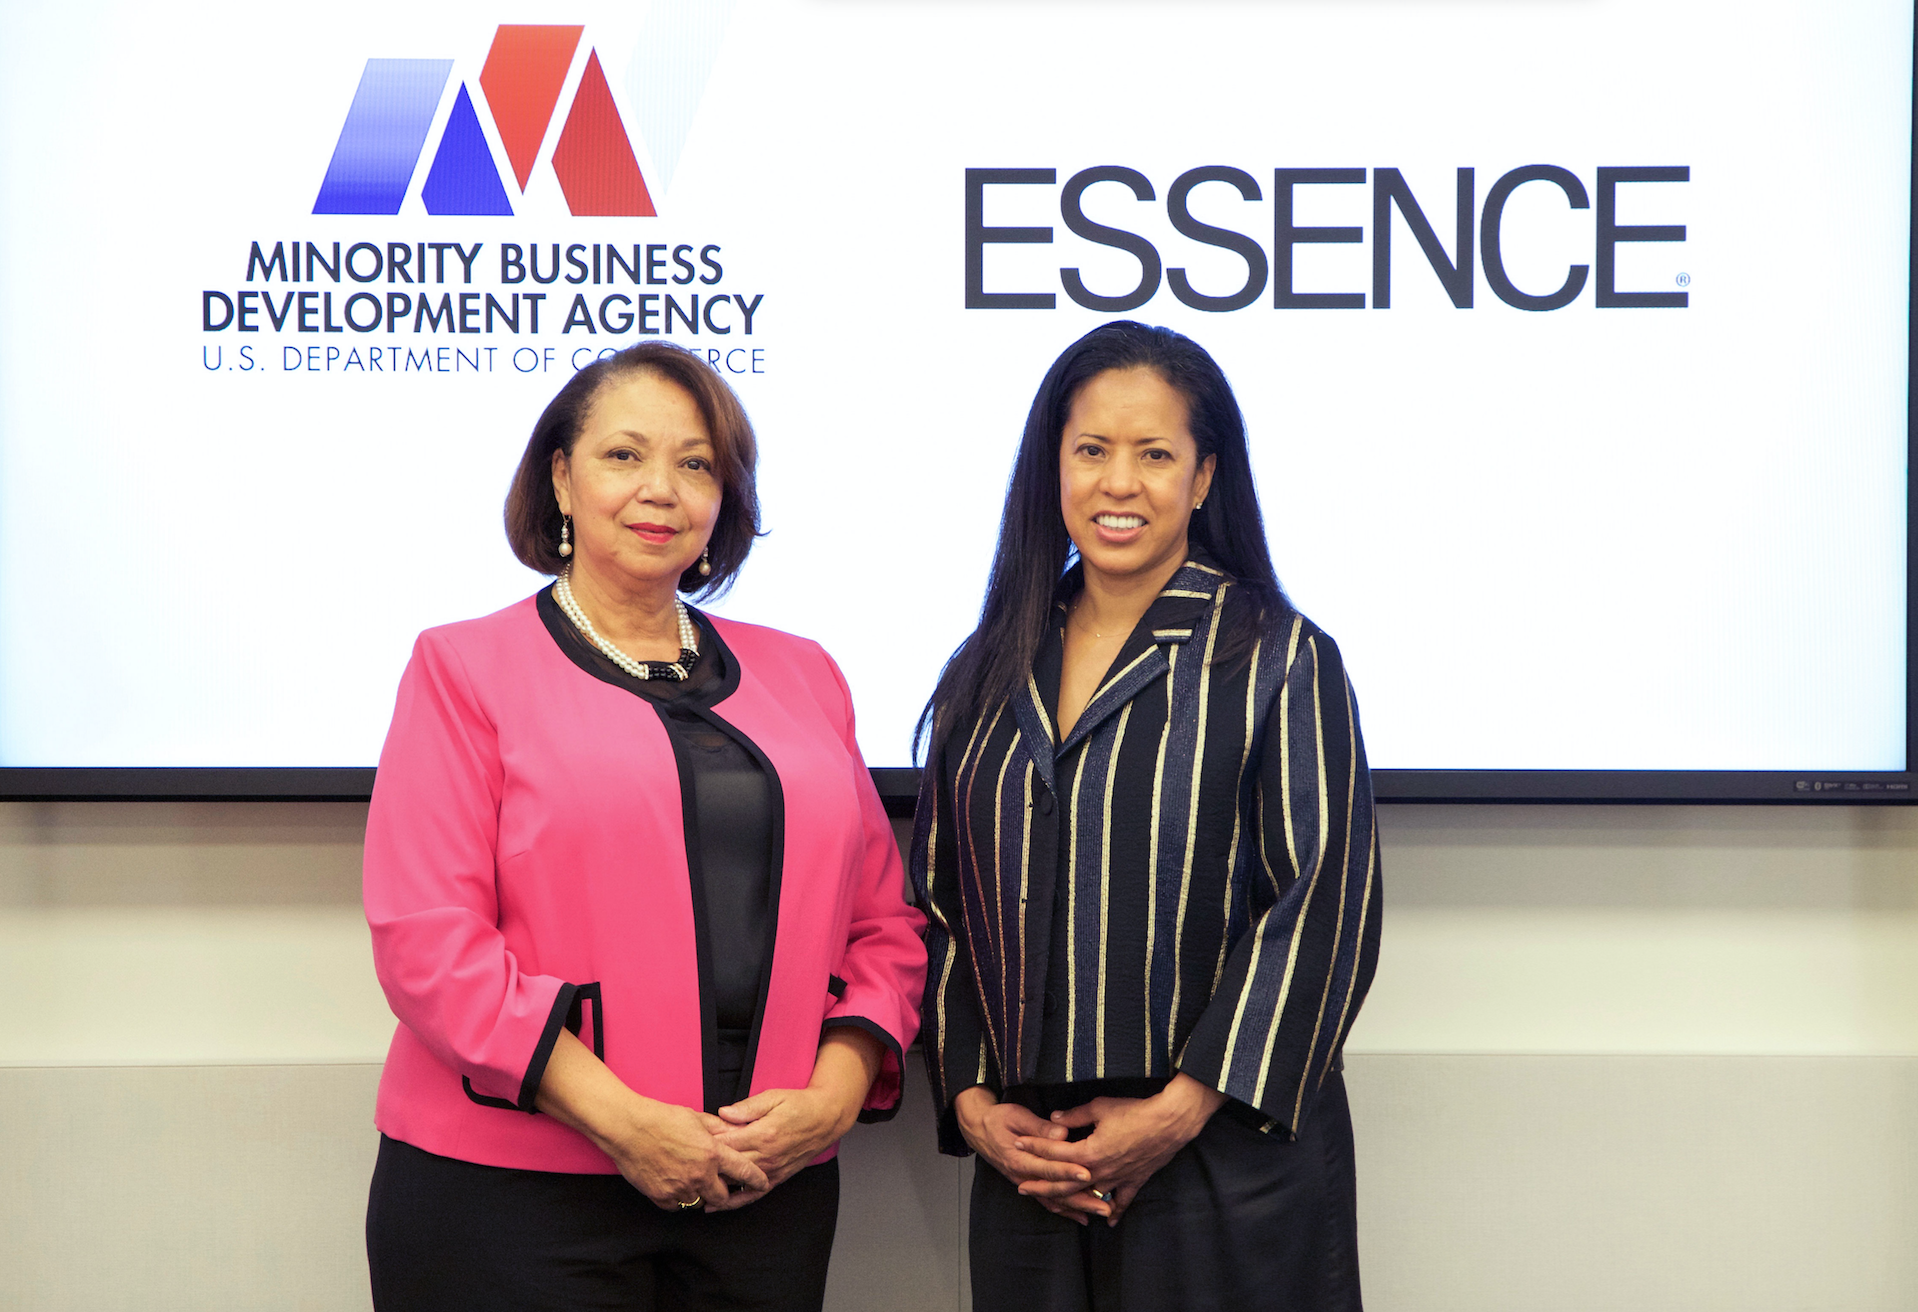 The Minority Business Development Agency Is Partnering With ESSENCE To Empower Entrepreneurs
